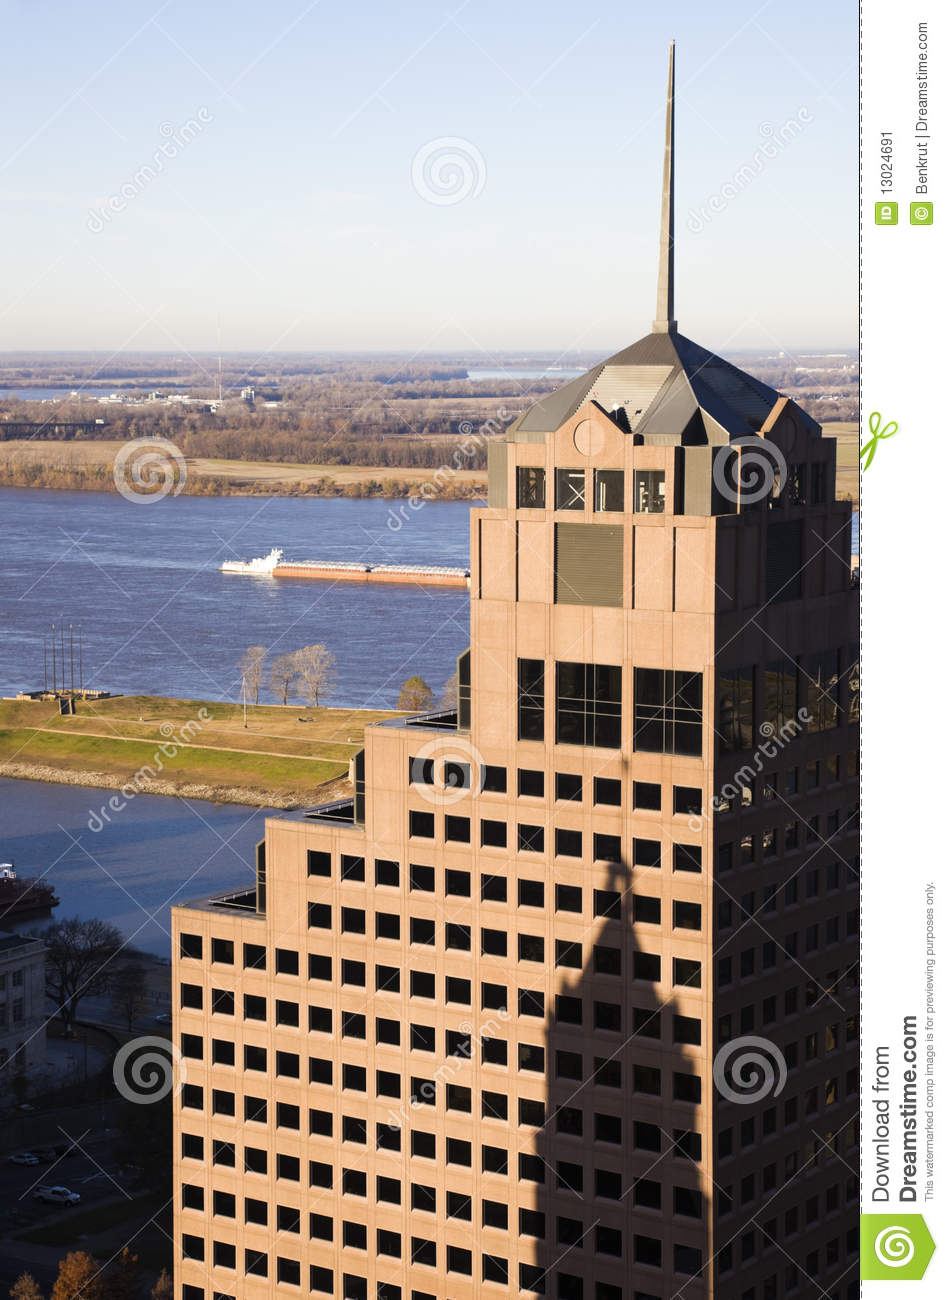 Tall Buildings In Downtown Of Memphis Stock Image   Image  13024691